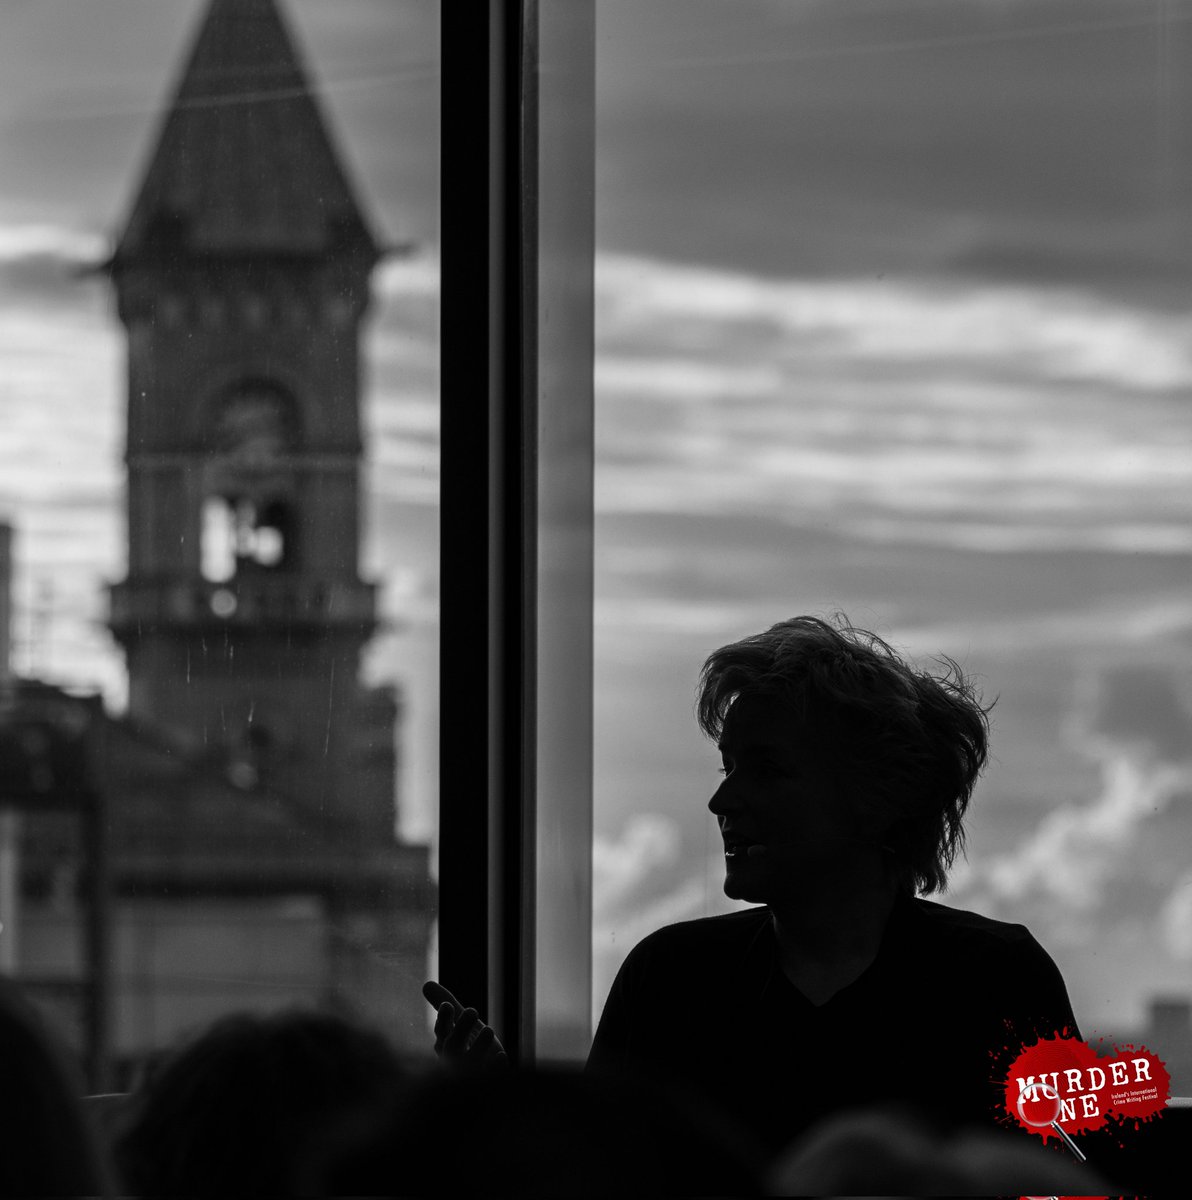 Karin Slaughter - photographed tonight at the dlr Lexicon in Dùn Laoghaire for #MurderOneFest 📚